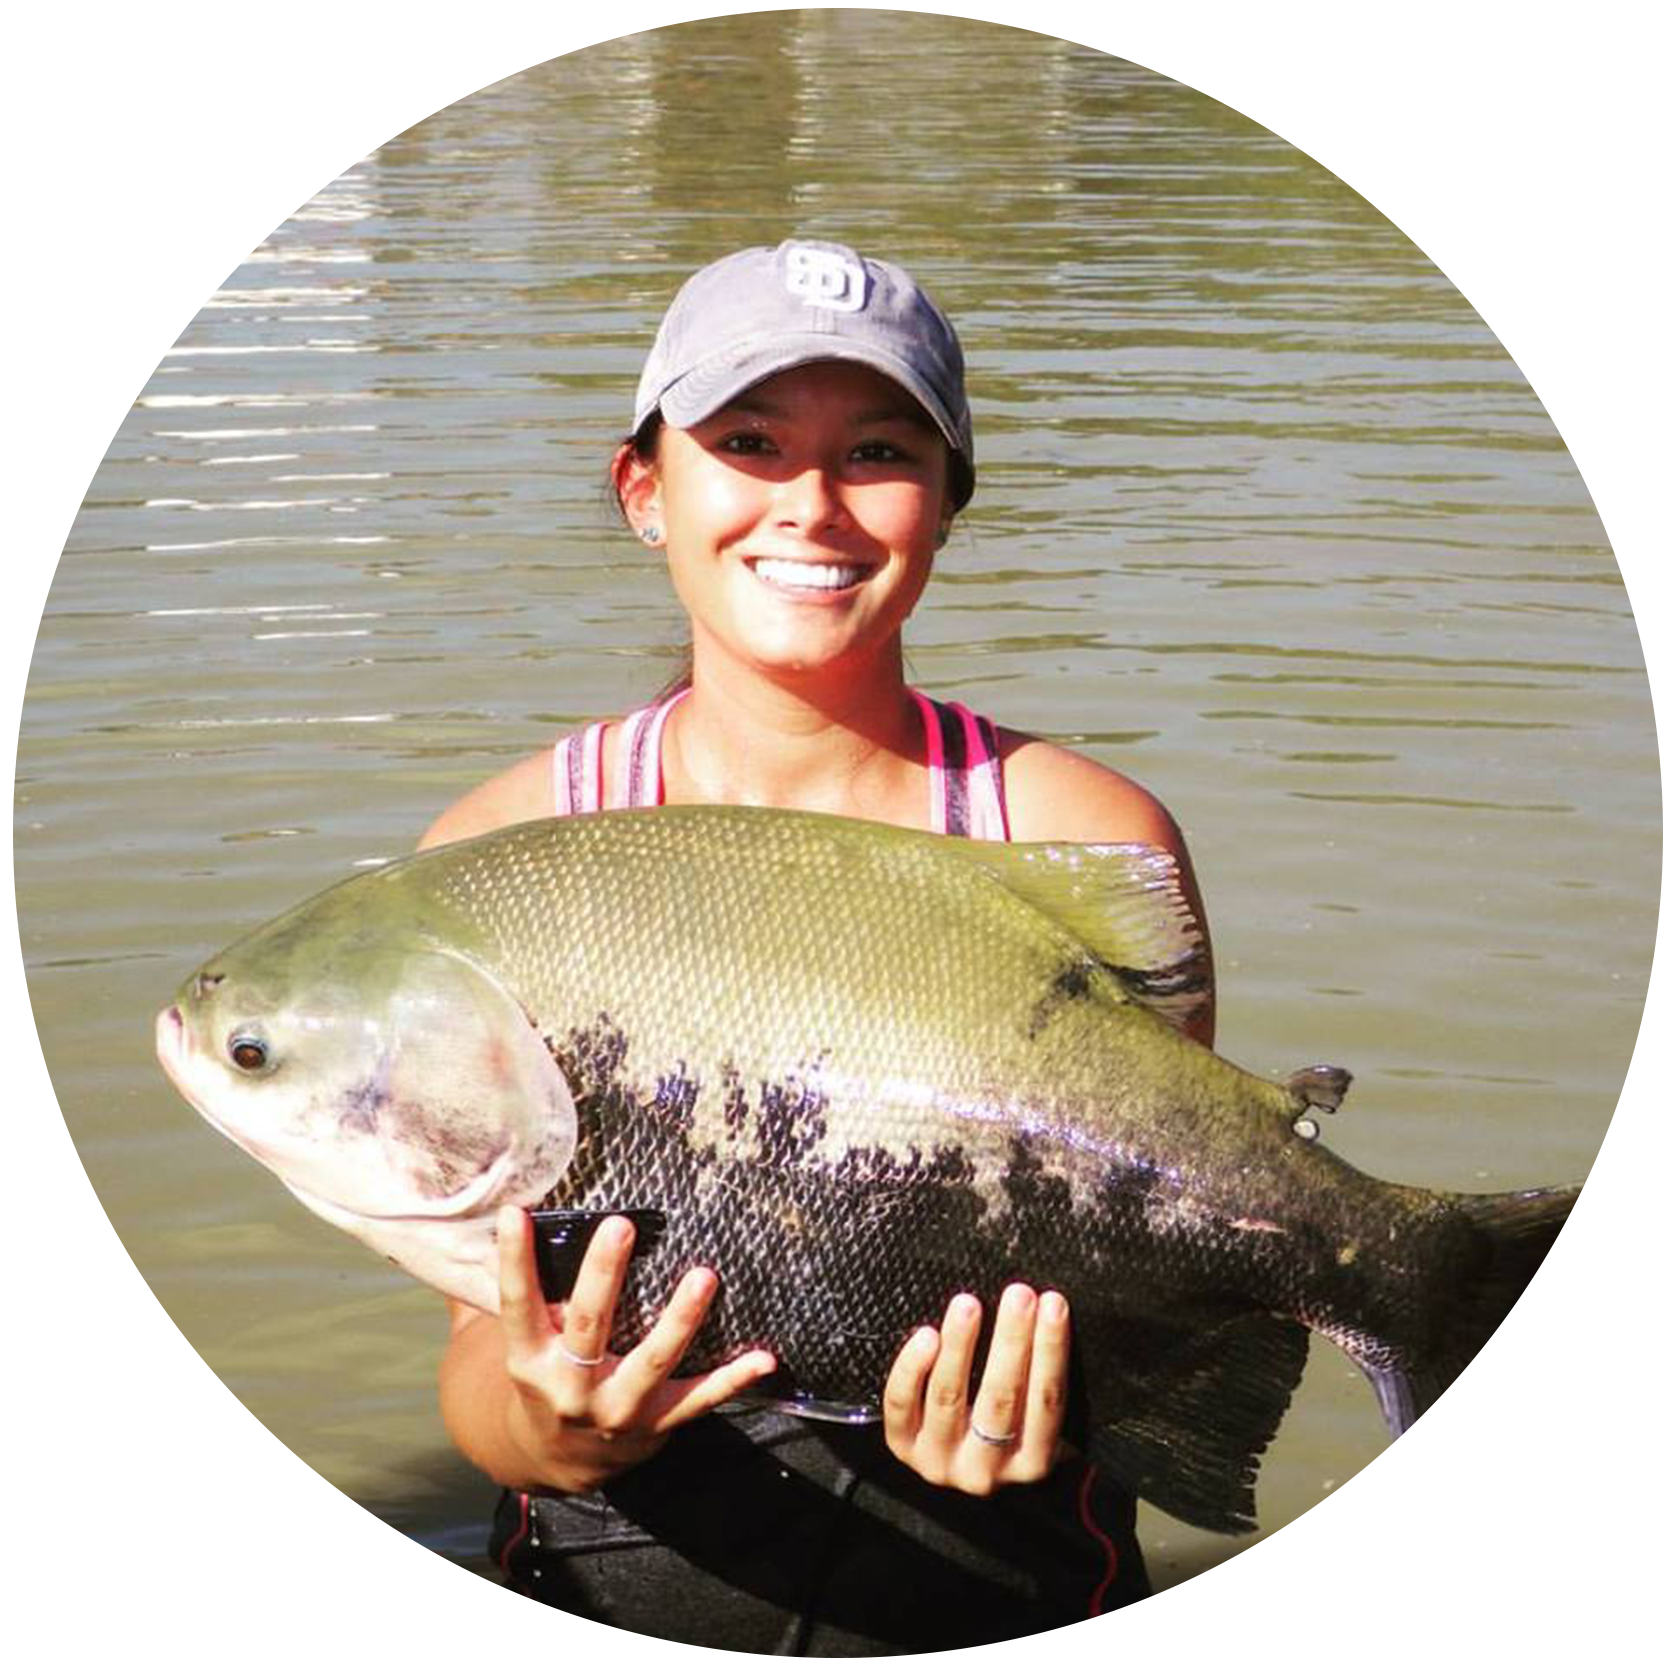 Rachel Shinto holds up a fish in front of a body of a water.